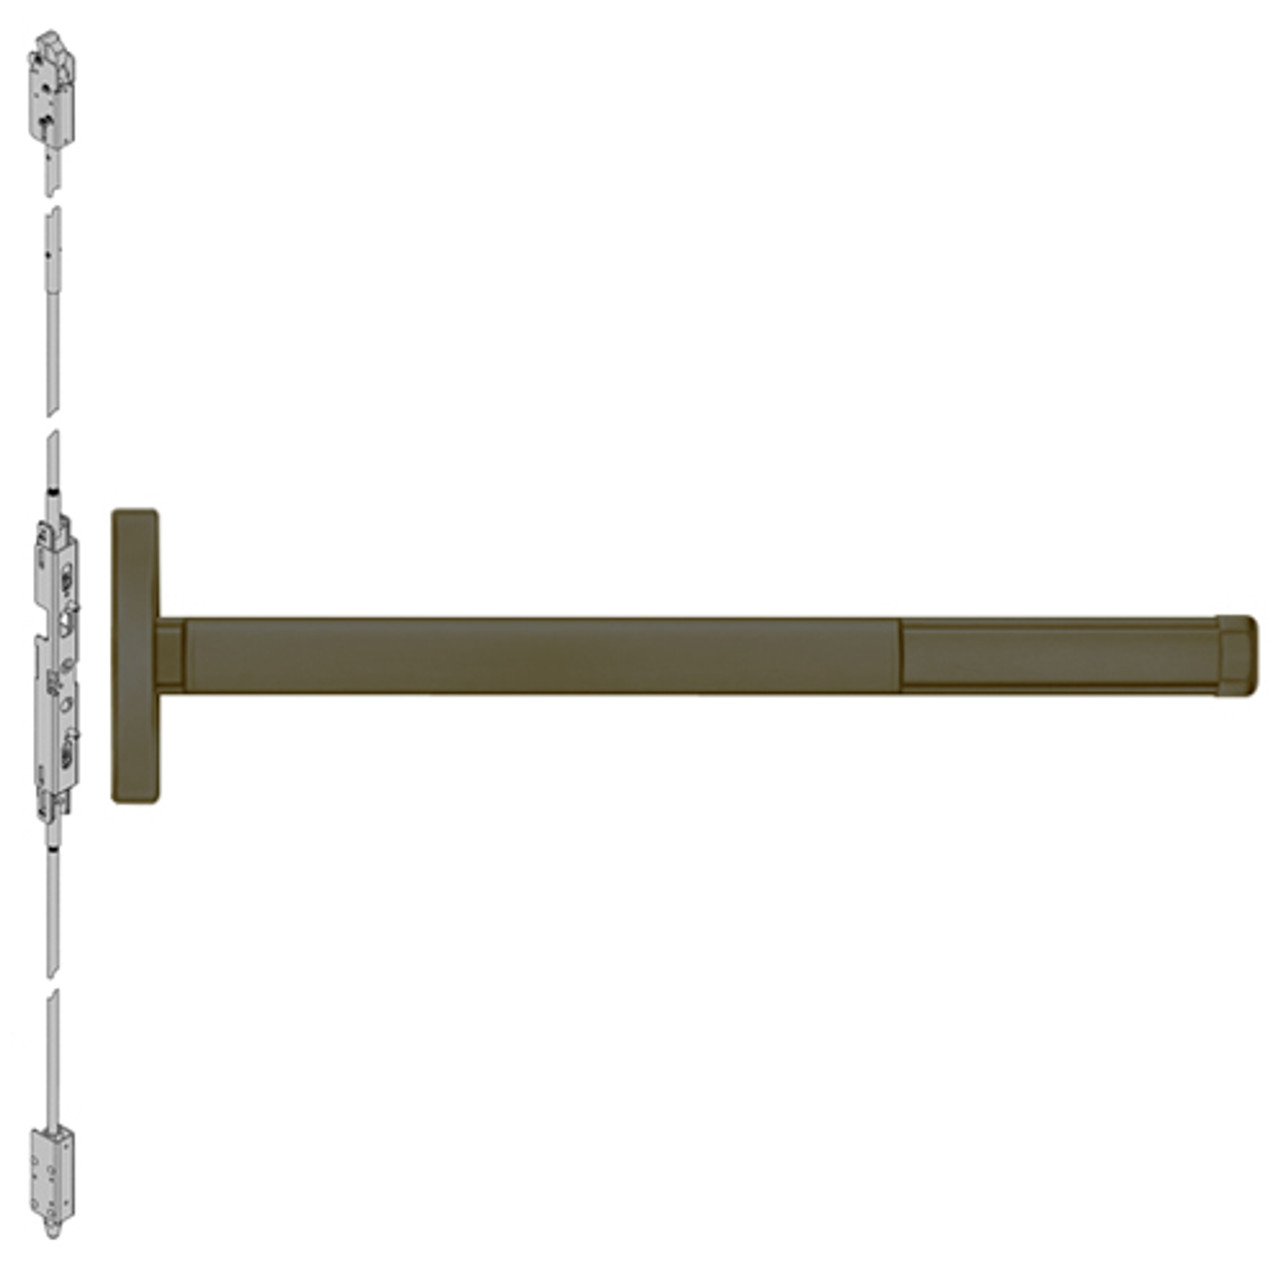 2603CD-613-36 PHI 2600 Series Non Fire Rated Concealed Vertical Rod Exit Device Prepped for Key Retracts Latchbolt with Cylinder Dogging in Oil Rubbed Bronze Finish